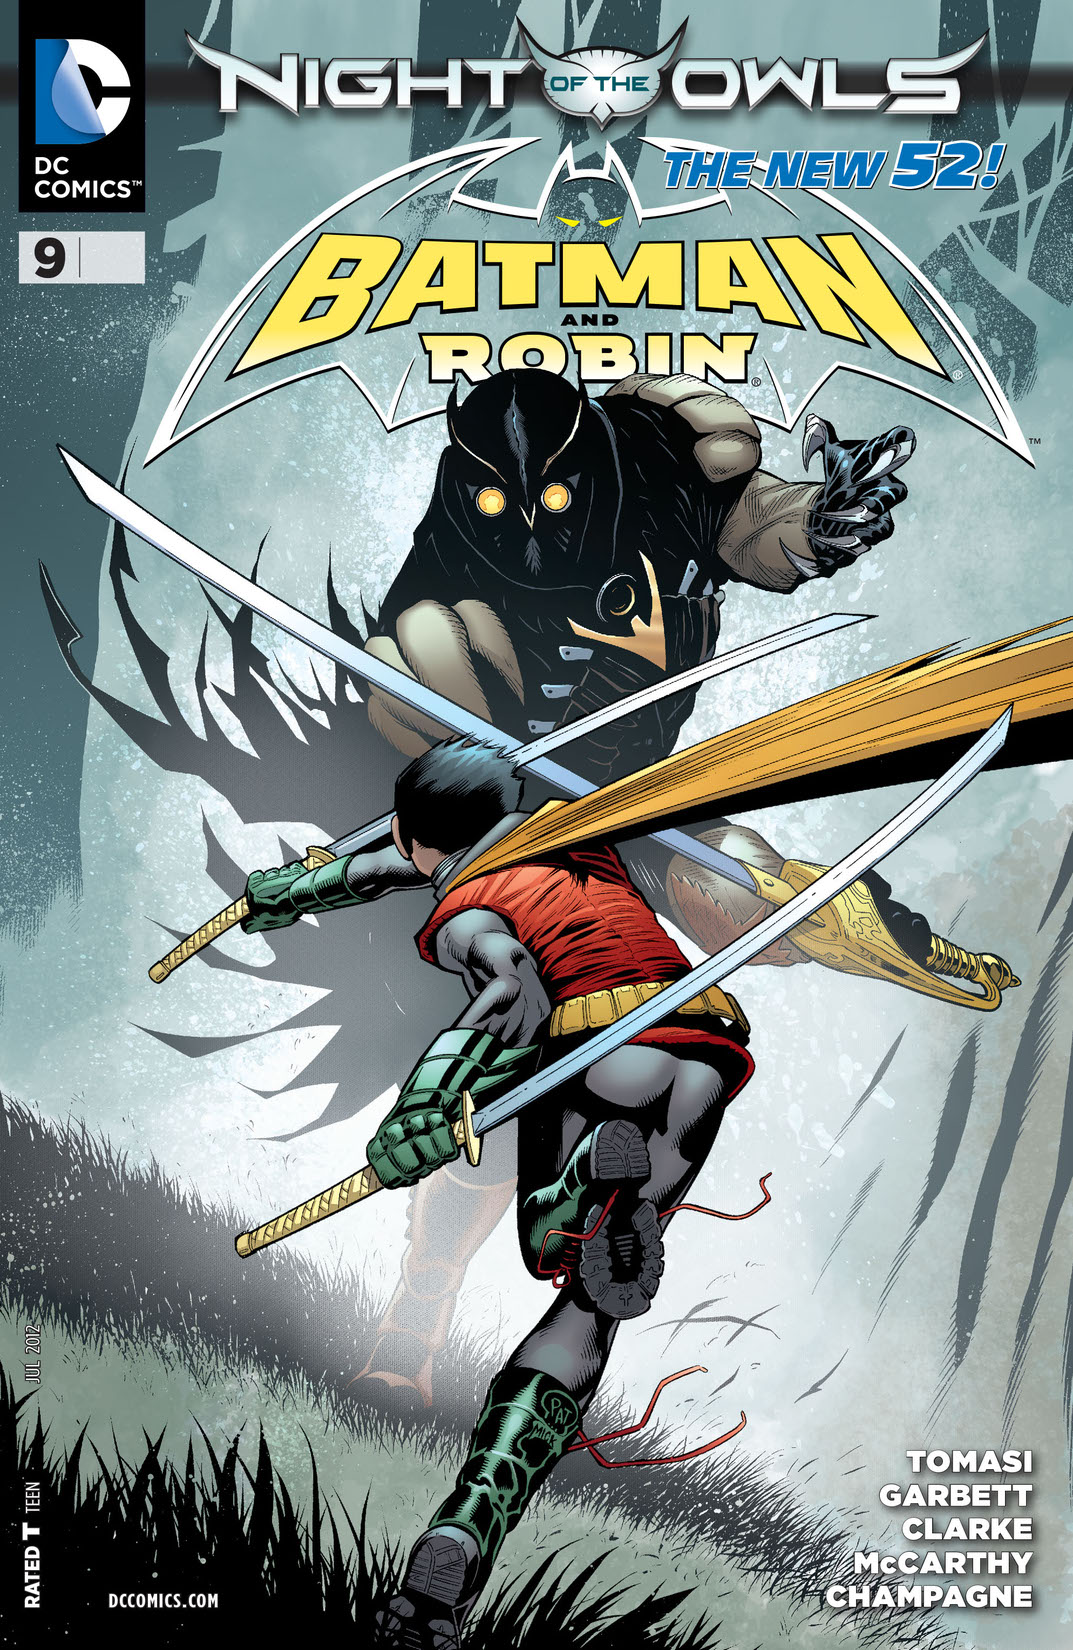 Batman and Robin (2011-) #9 preview images